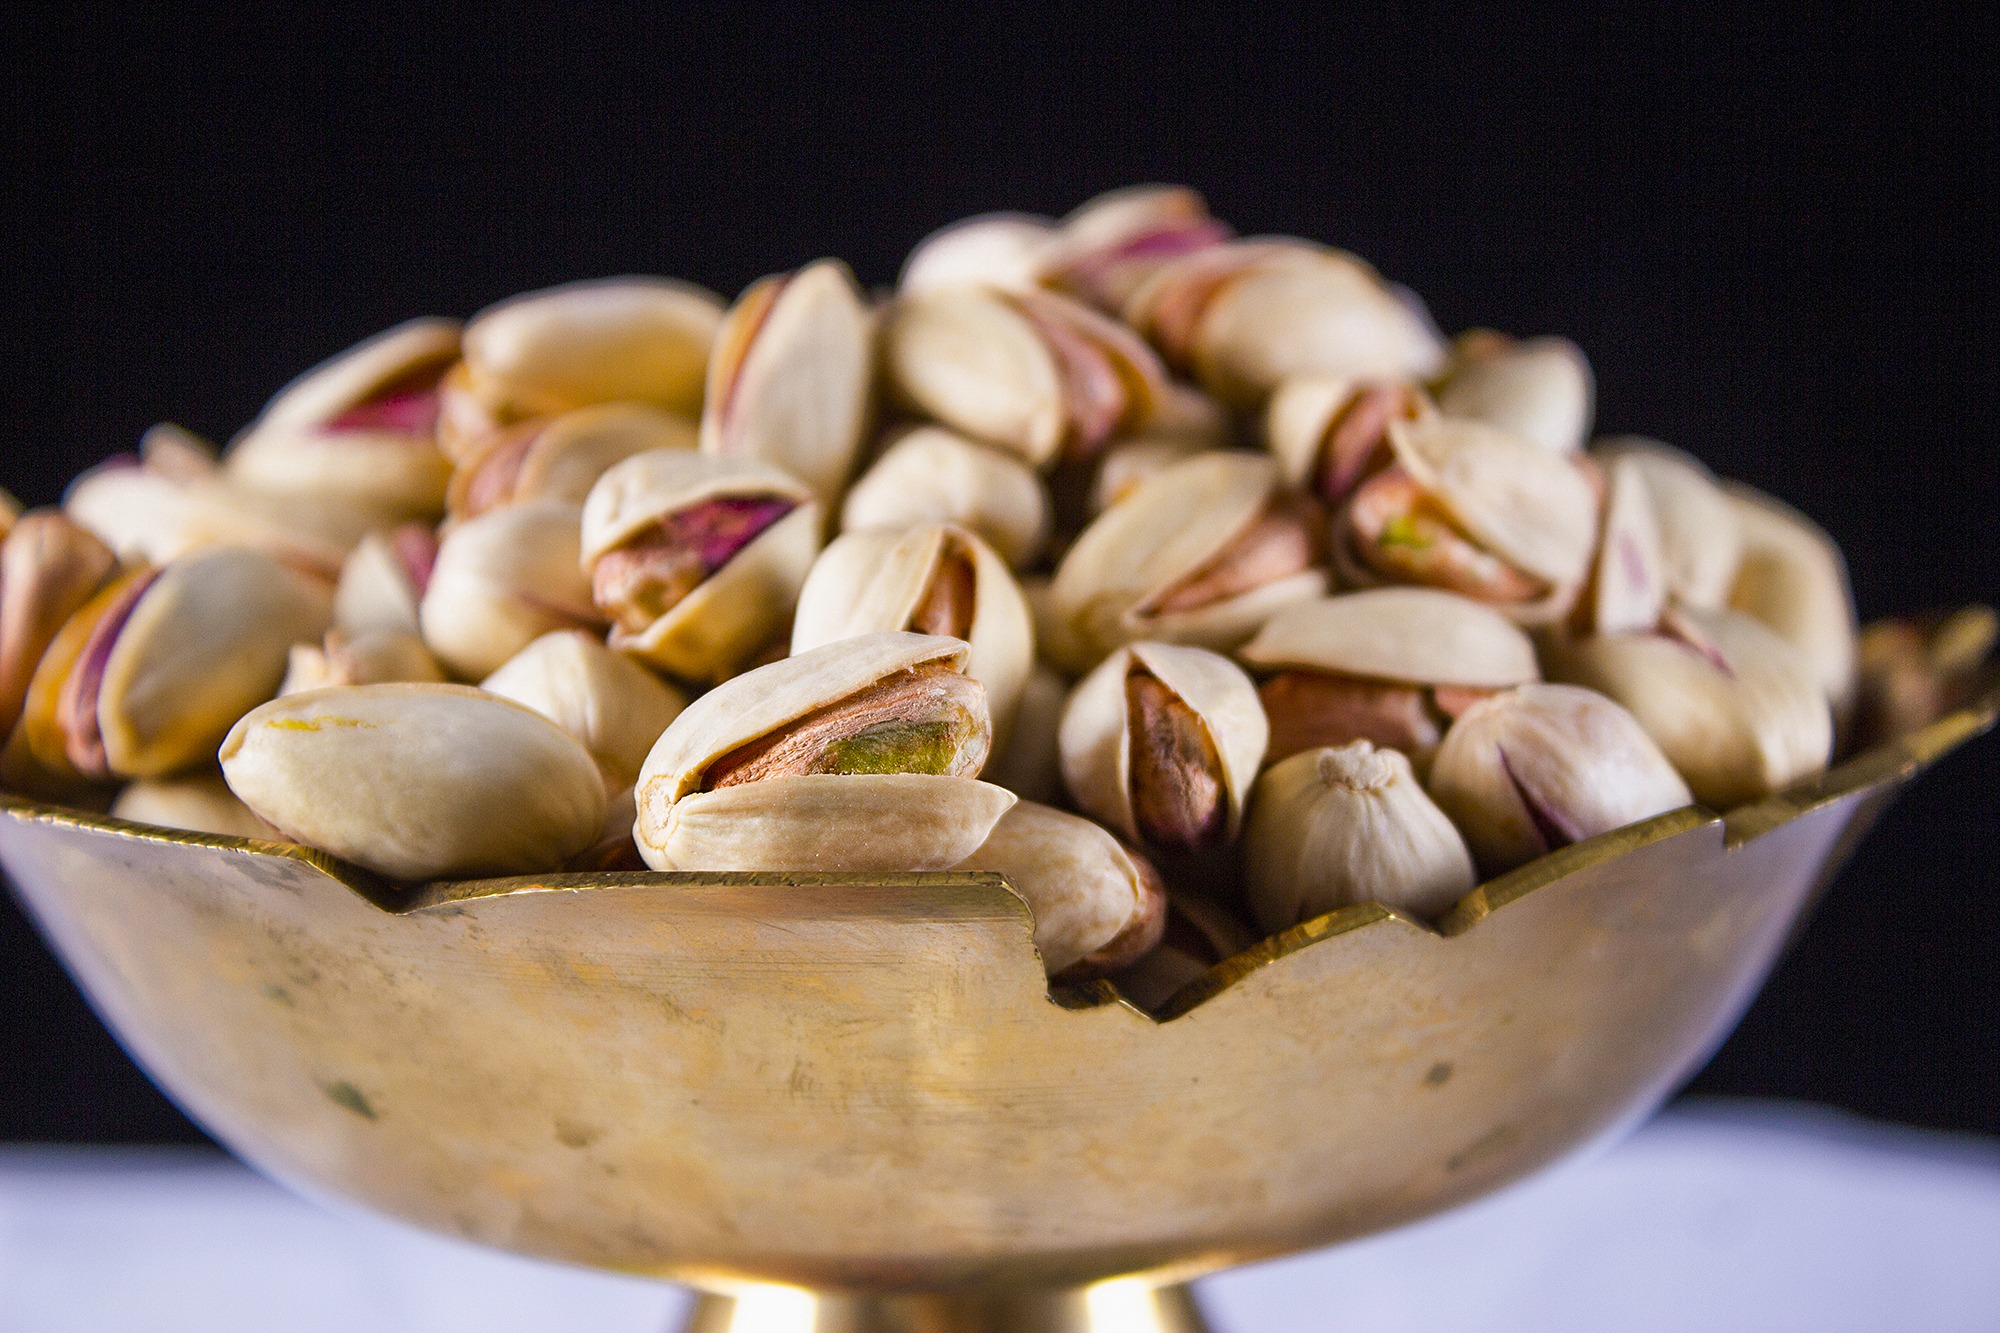 The price of Persian Pistachios - Cheap Purchase - Nutex Company